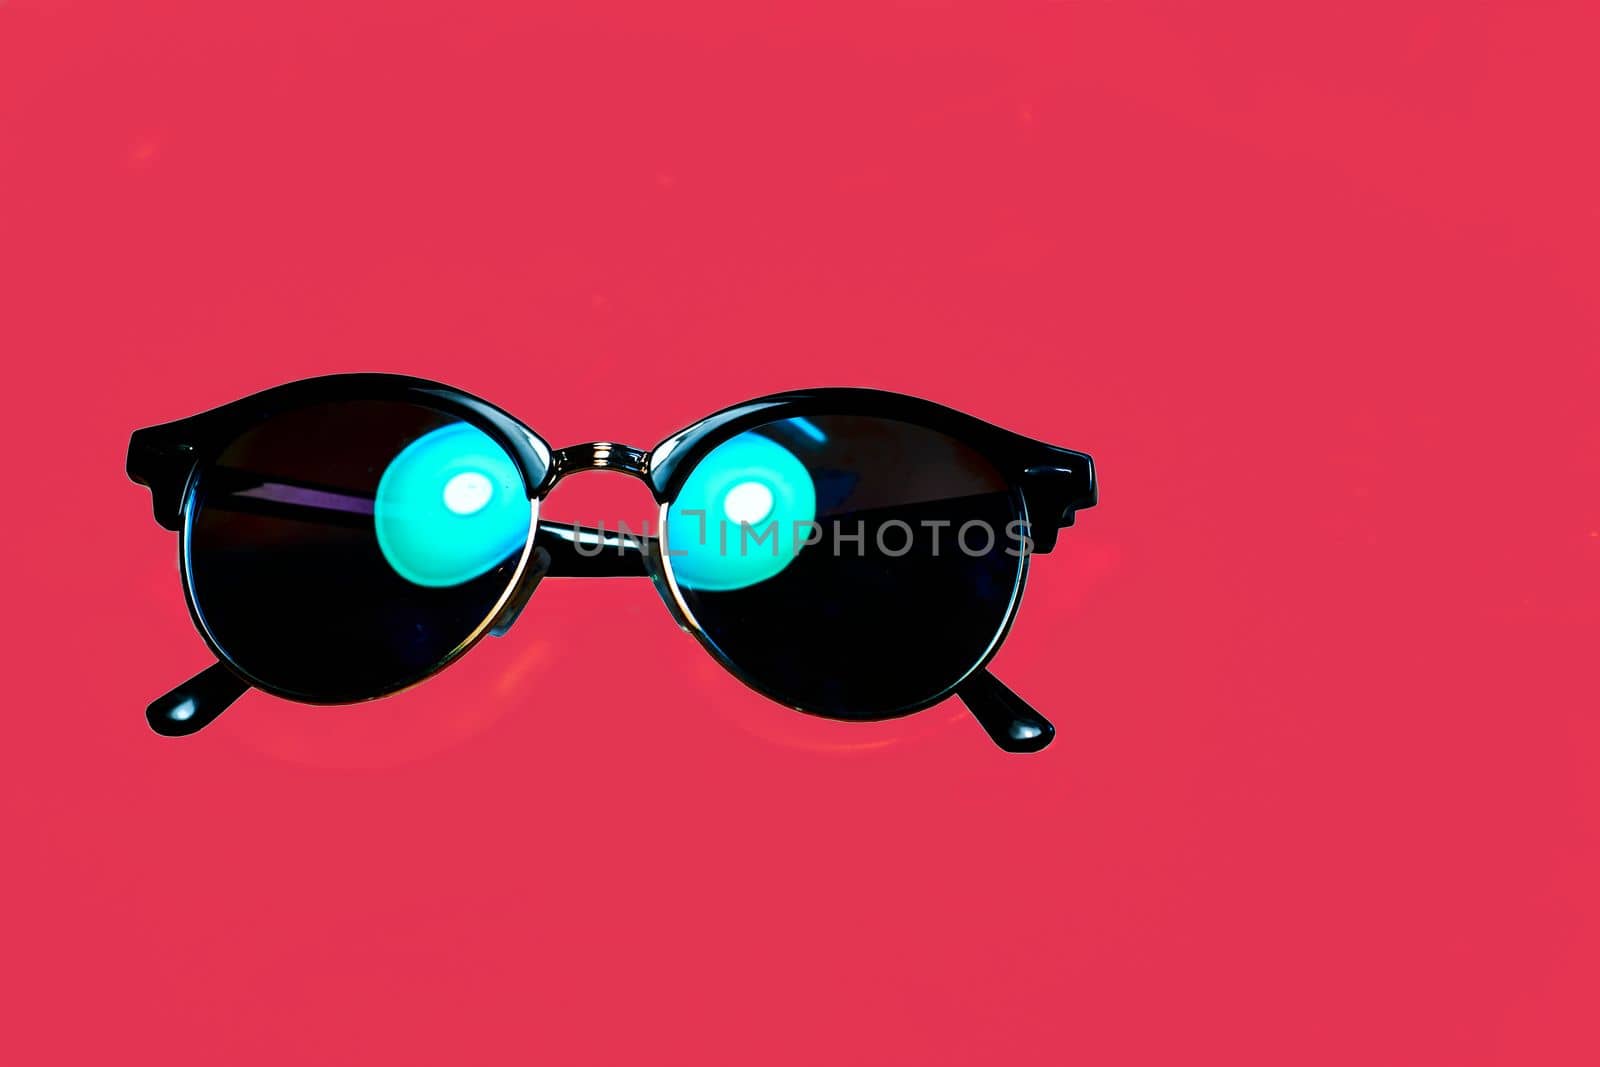 Black sunglasses with emerald highlights on a red background by jovani68